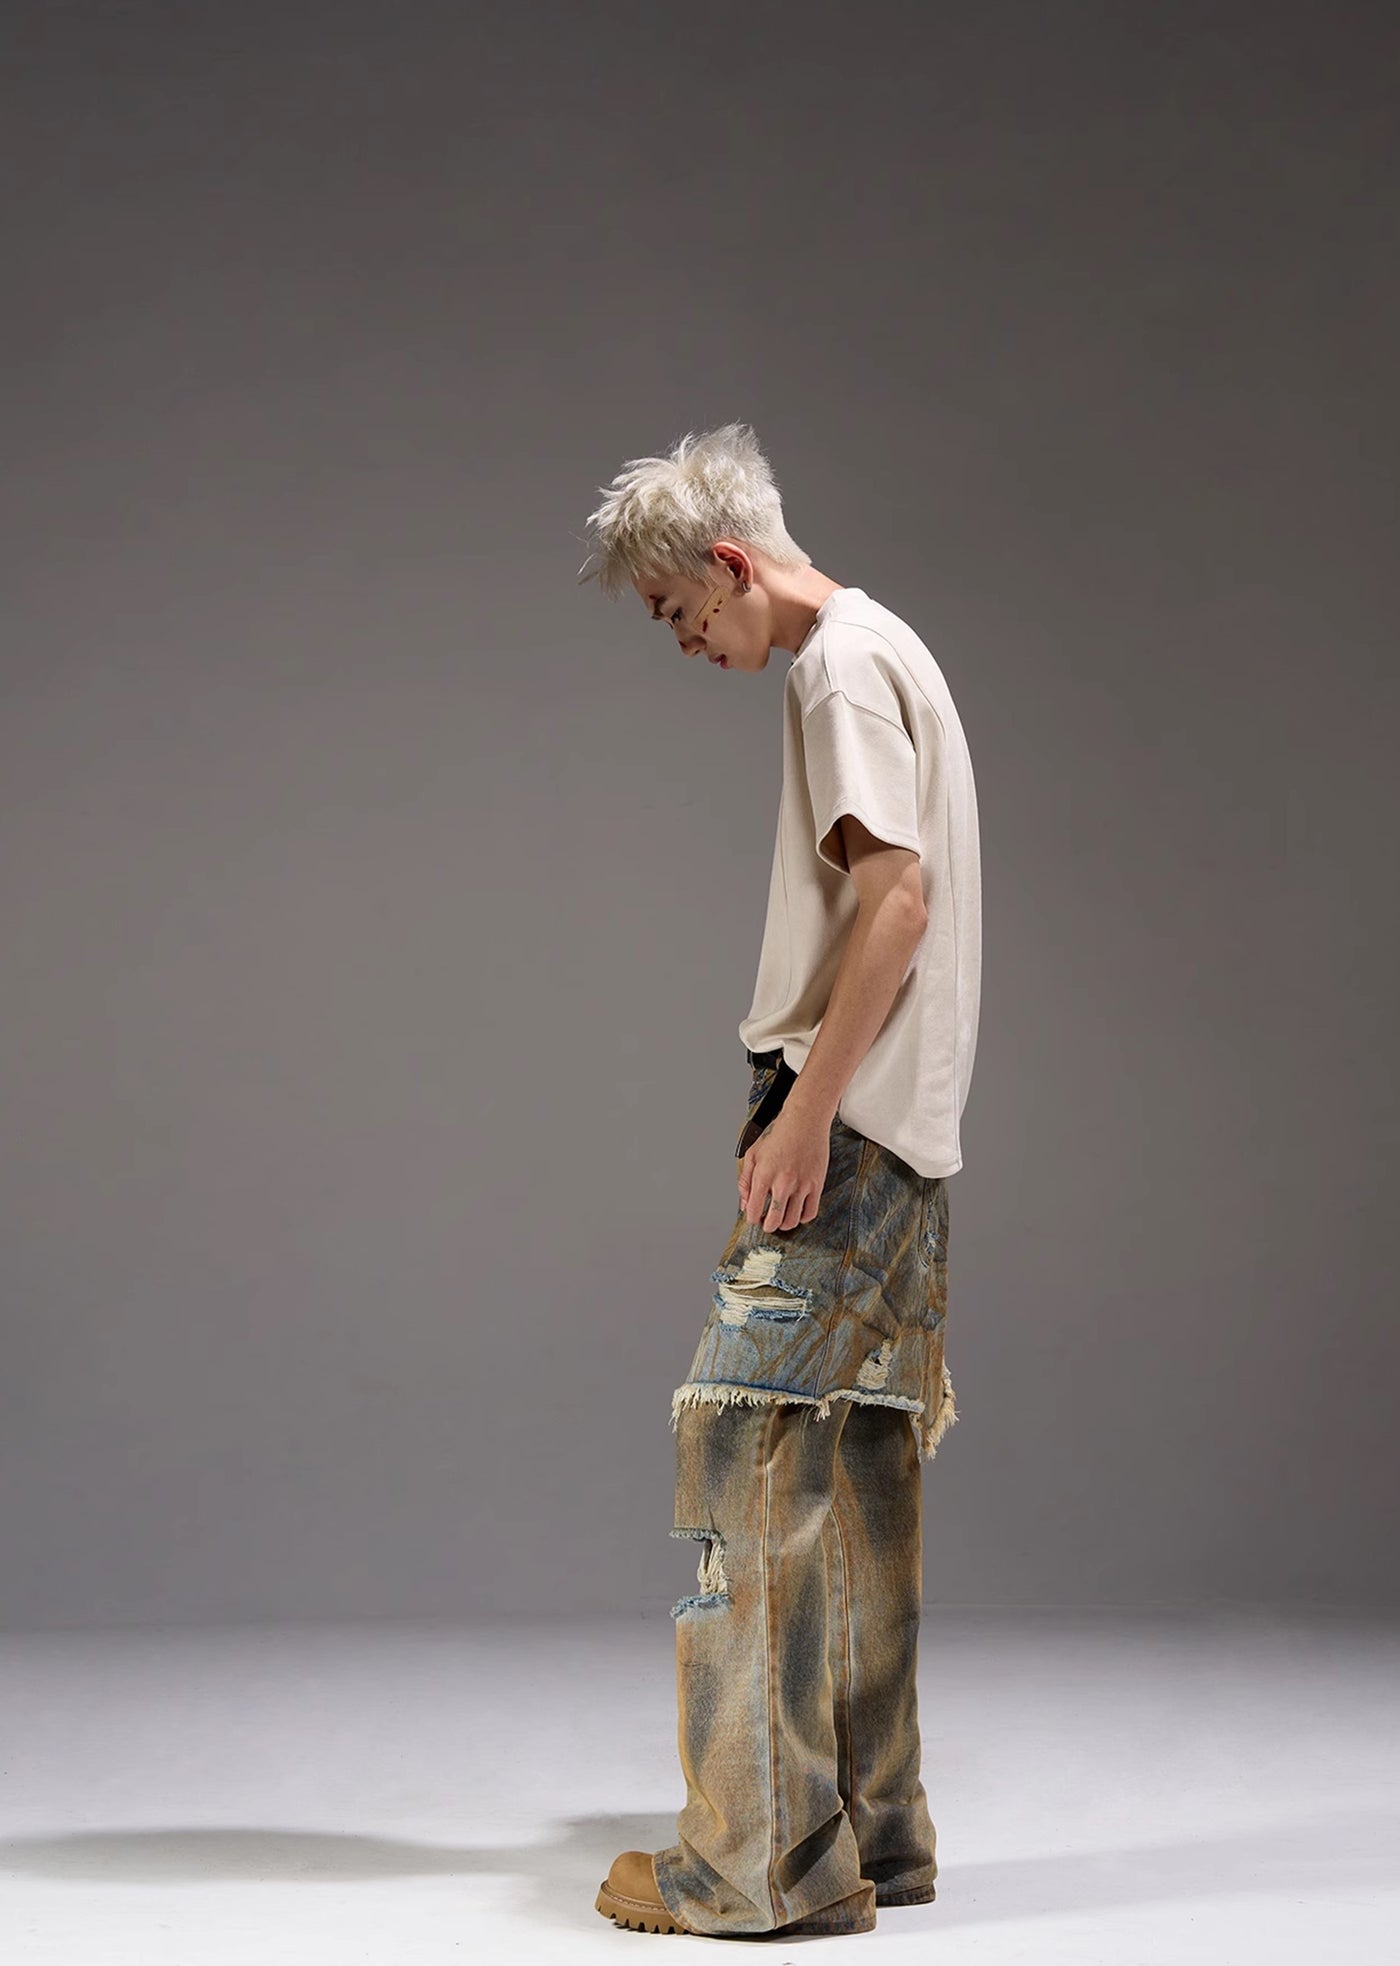 【MAXDSTR】Vintage processed Y-line silhouette layered style denim pants  MD0157